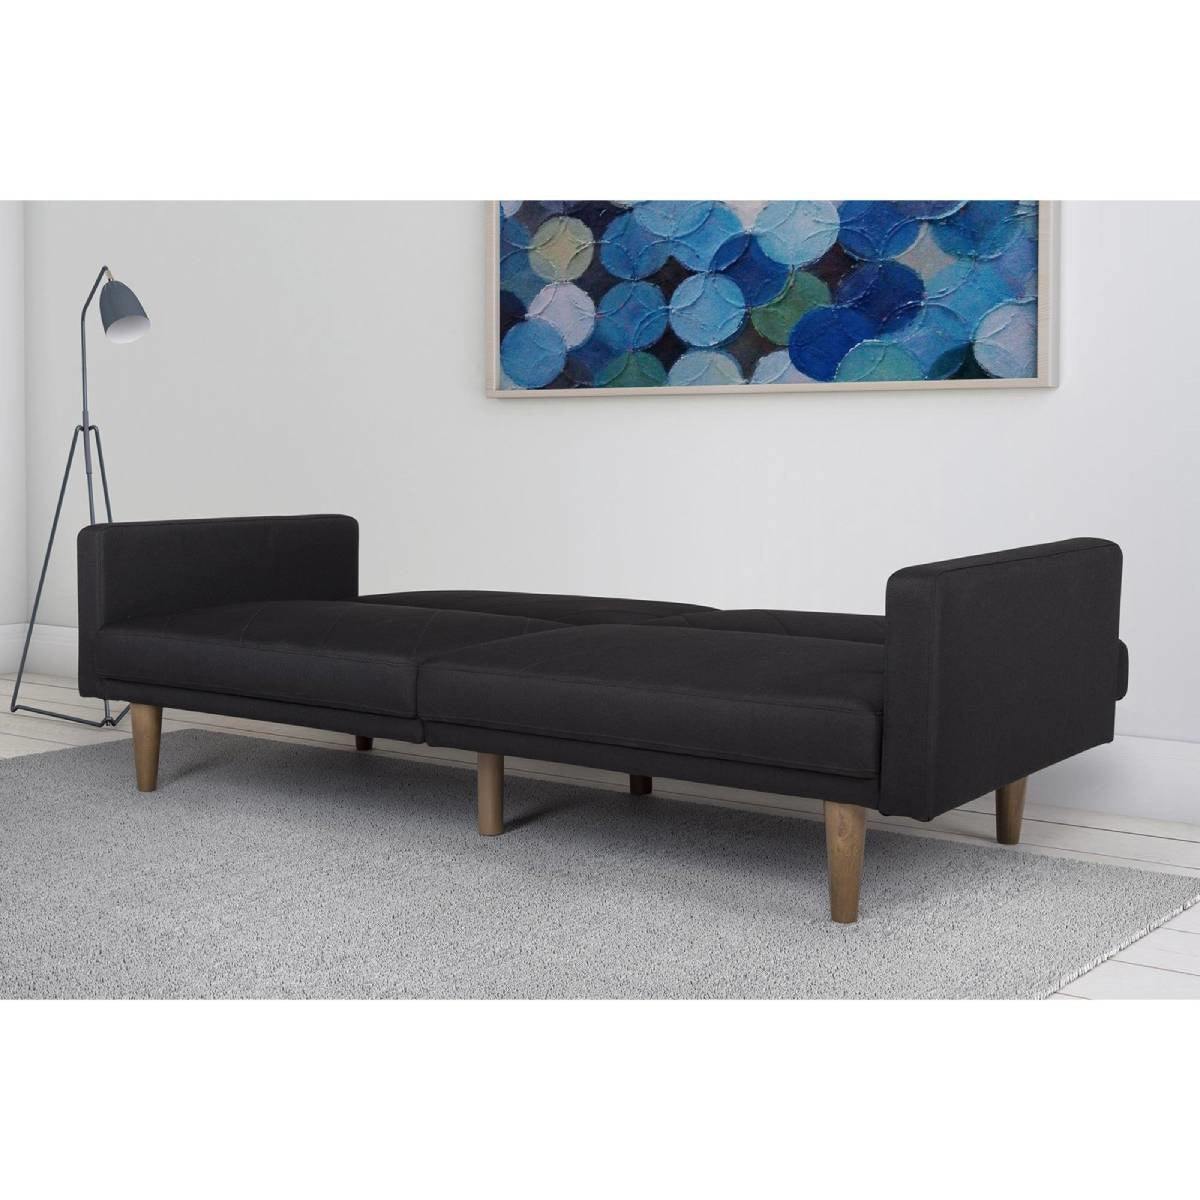 Living Room > Sofas - Black Mid-Century Modern Linen Upholstered Sofa Bed With Classic Wood Legs